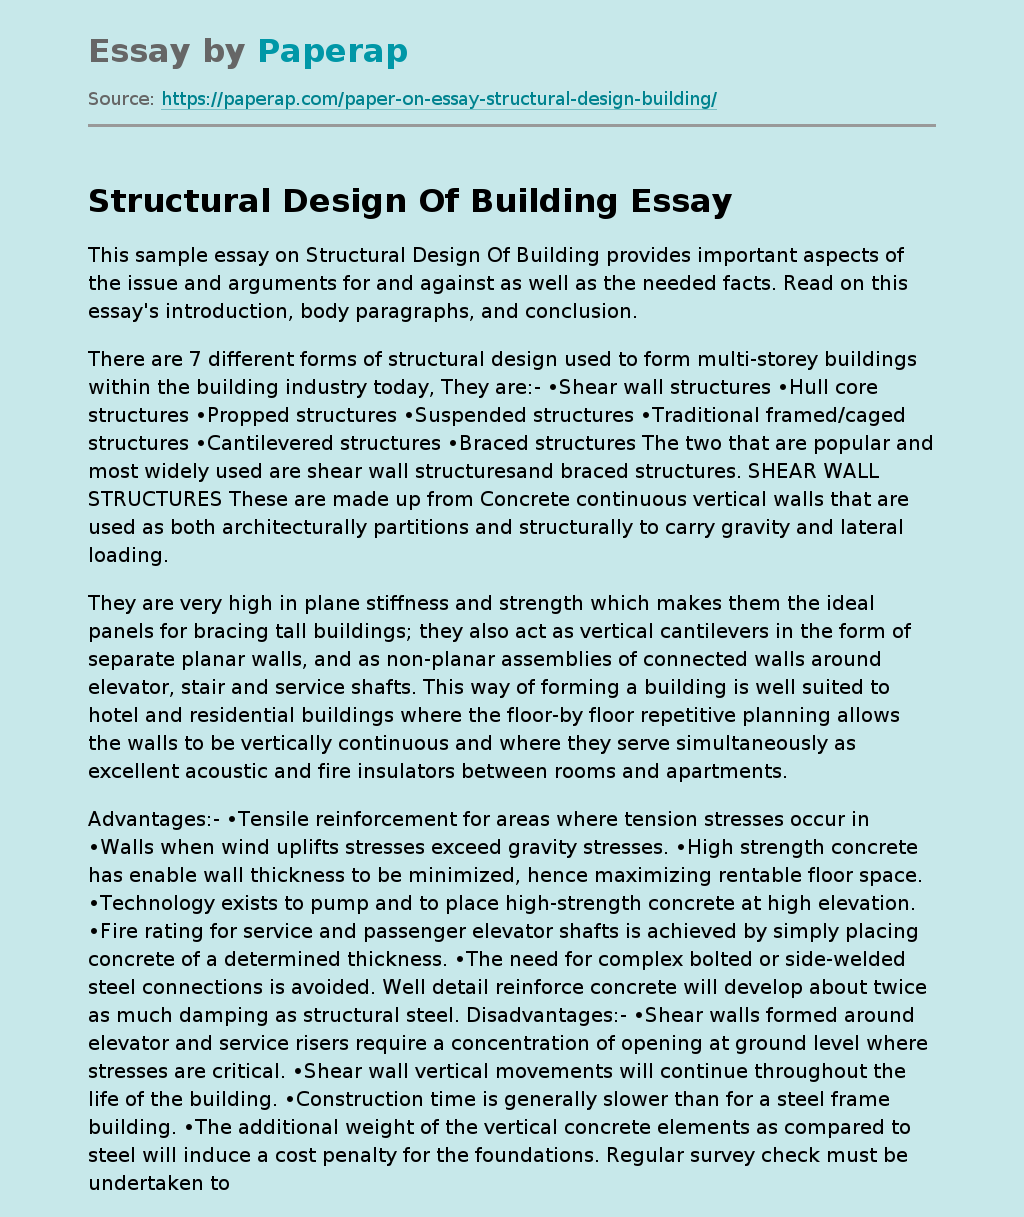 Structural Design Of Building